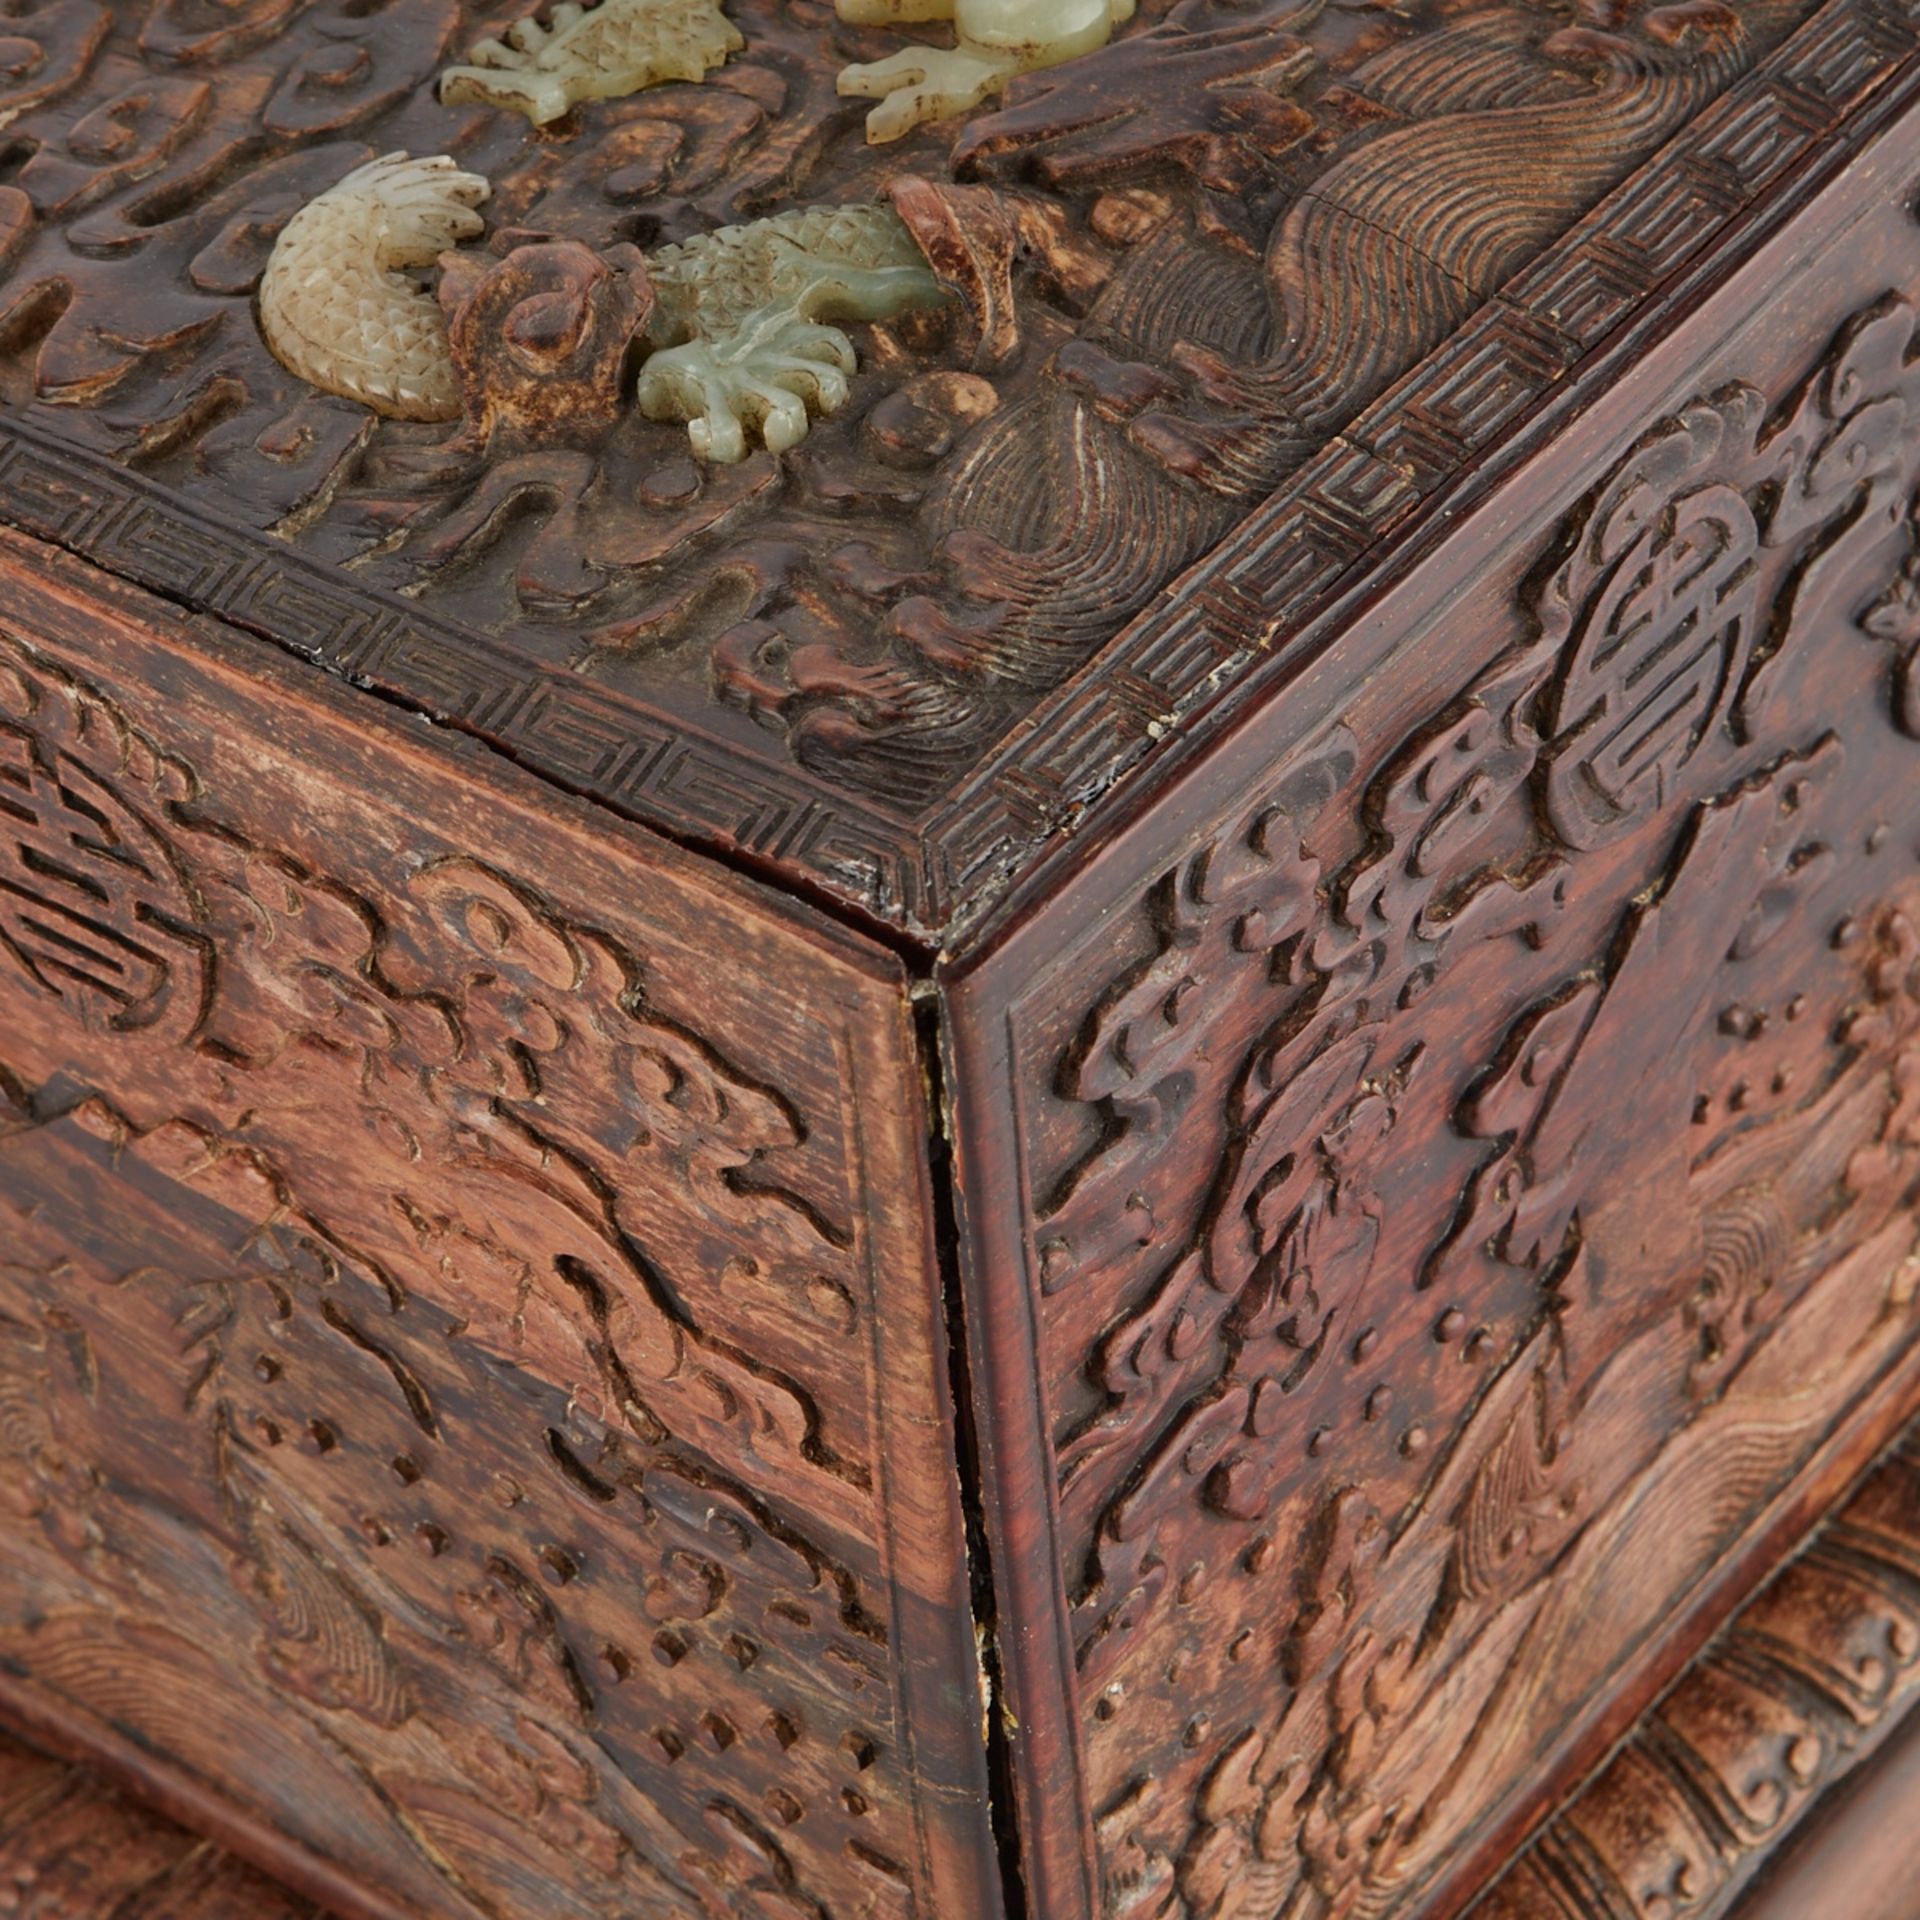 Chinese Seal Chest w/ Inlaid Jade Dragon - Image 9 of 10